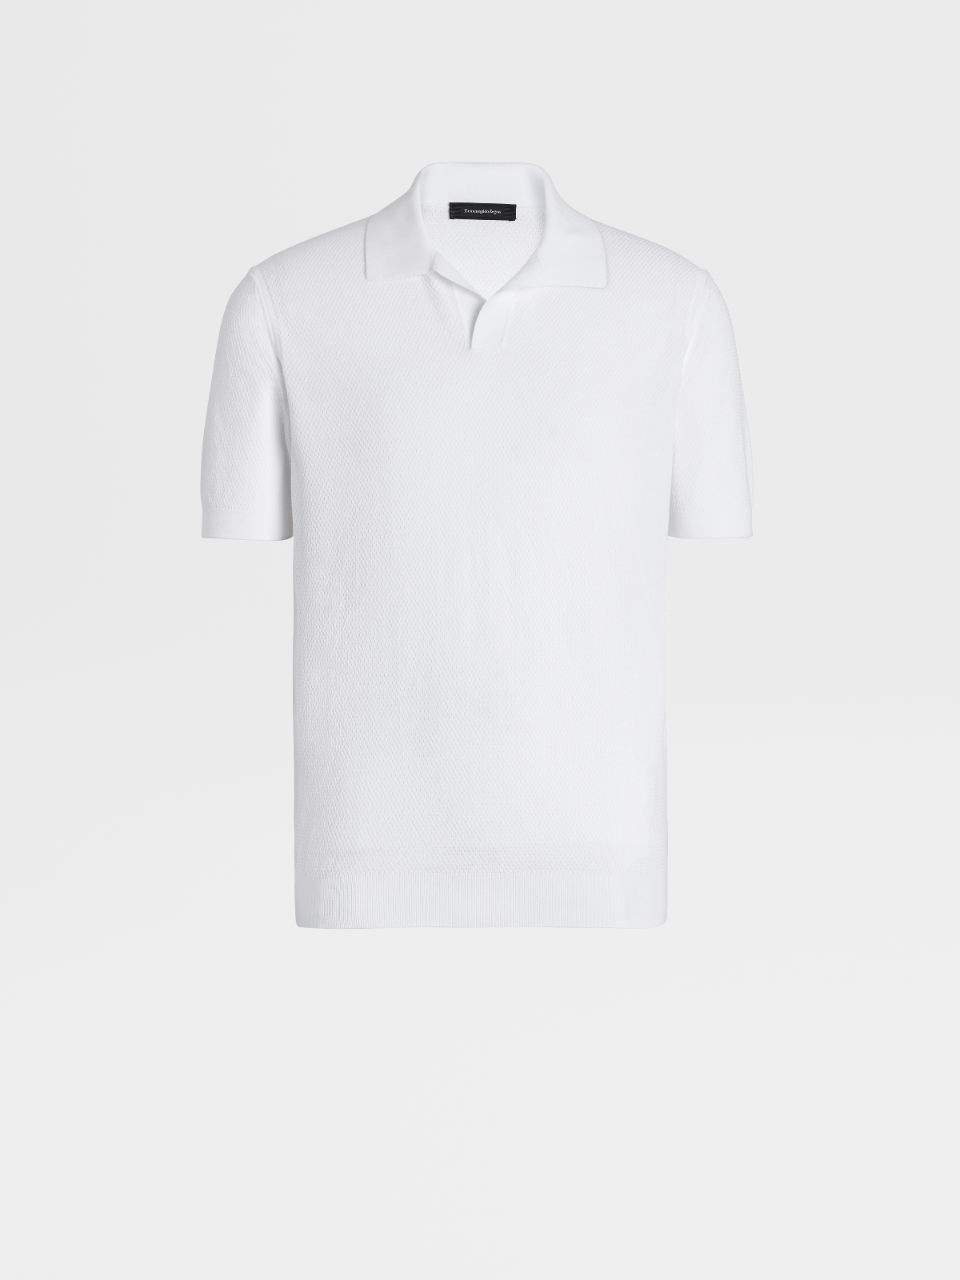 White Pure Cotton Knit Short-sleeve Polo